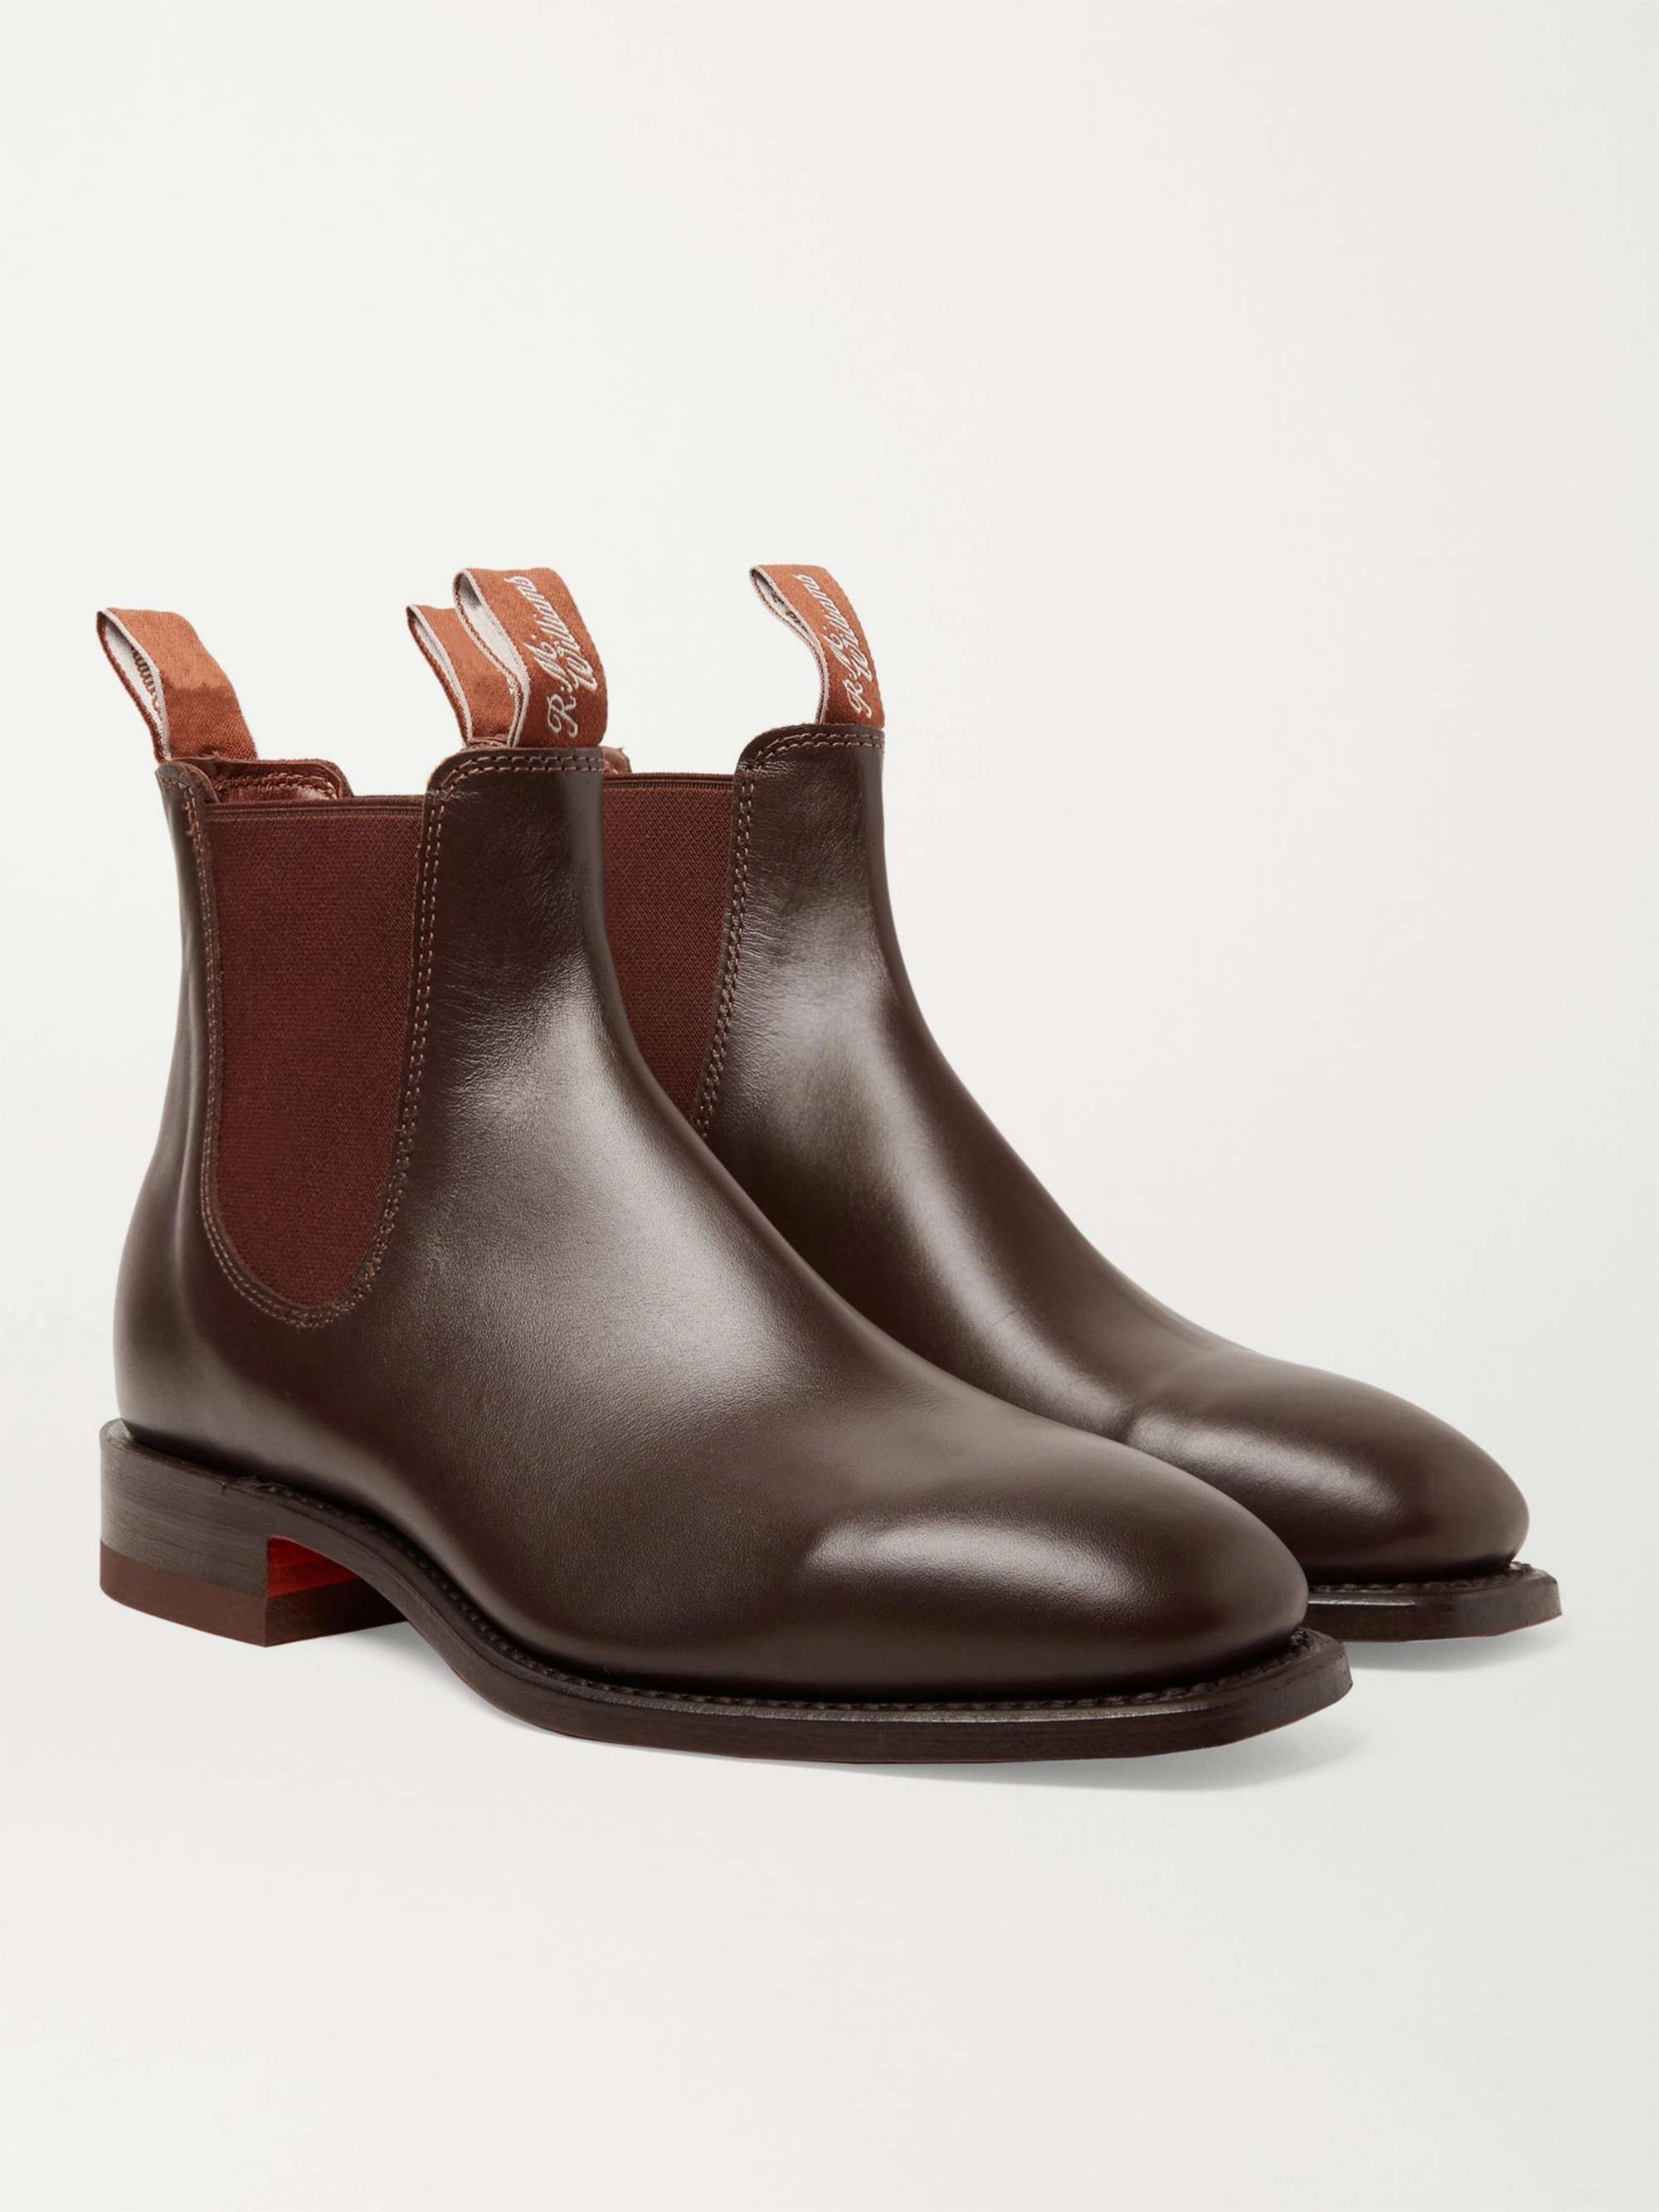 R.M.WILLIAMS Craftsman Leather Chelsea Boots